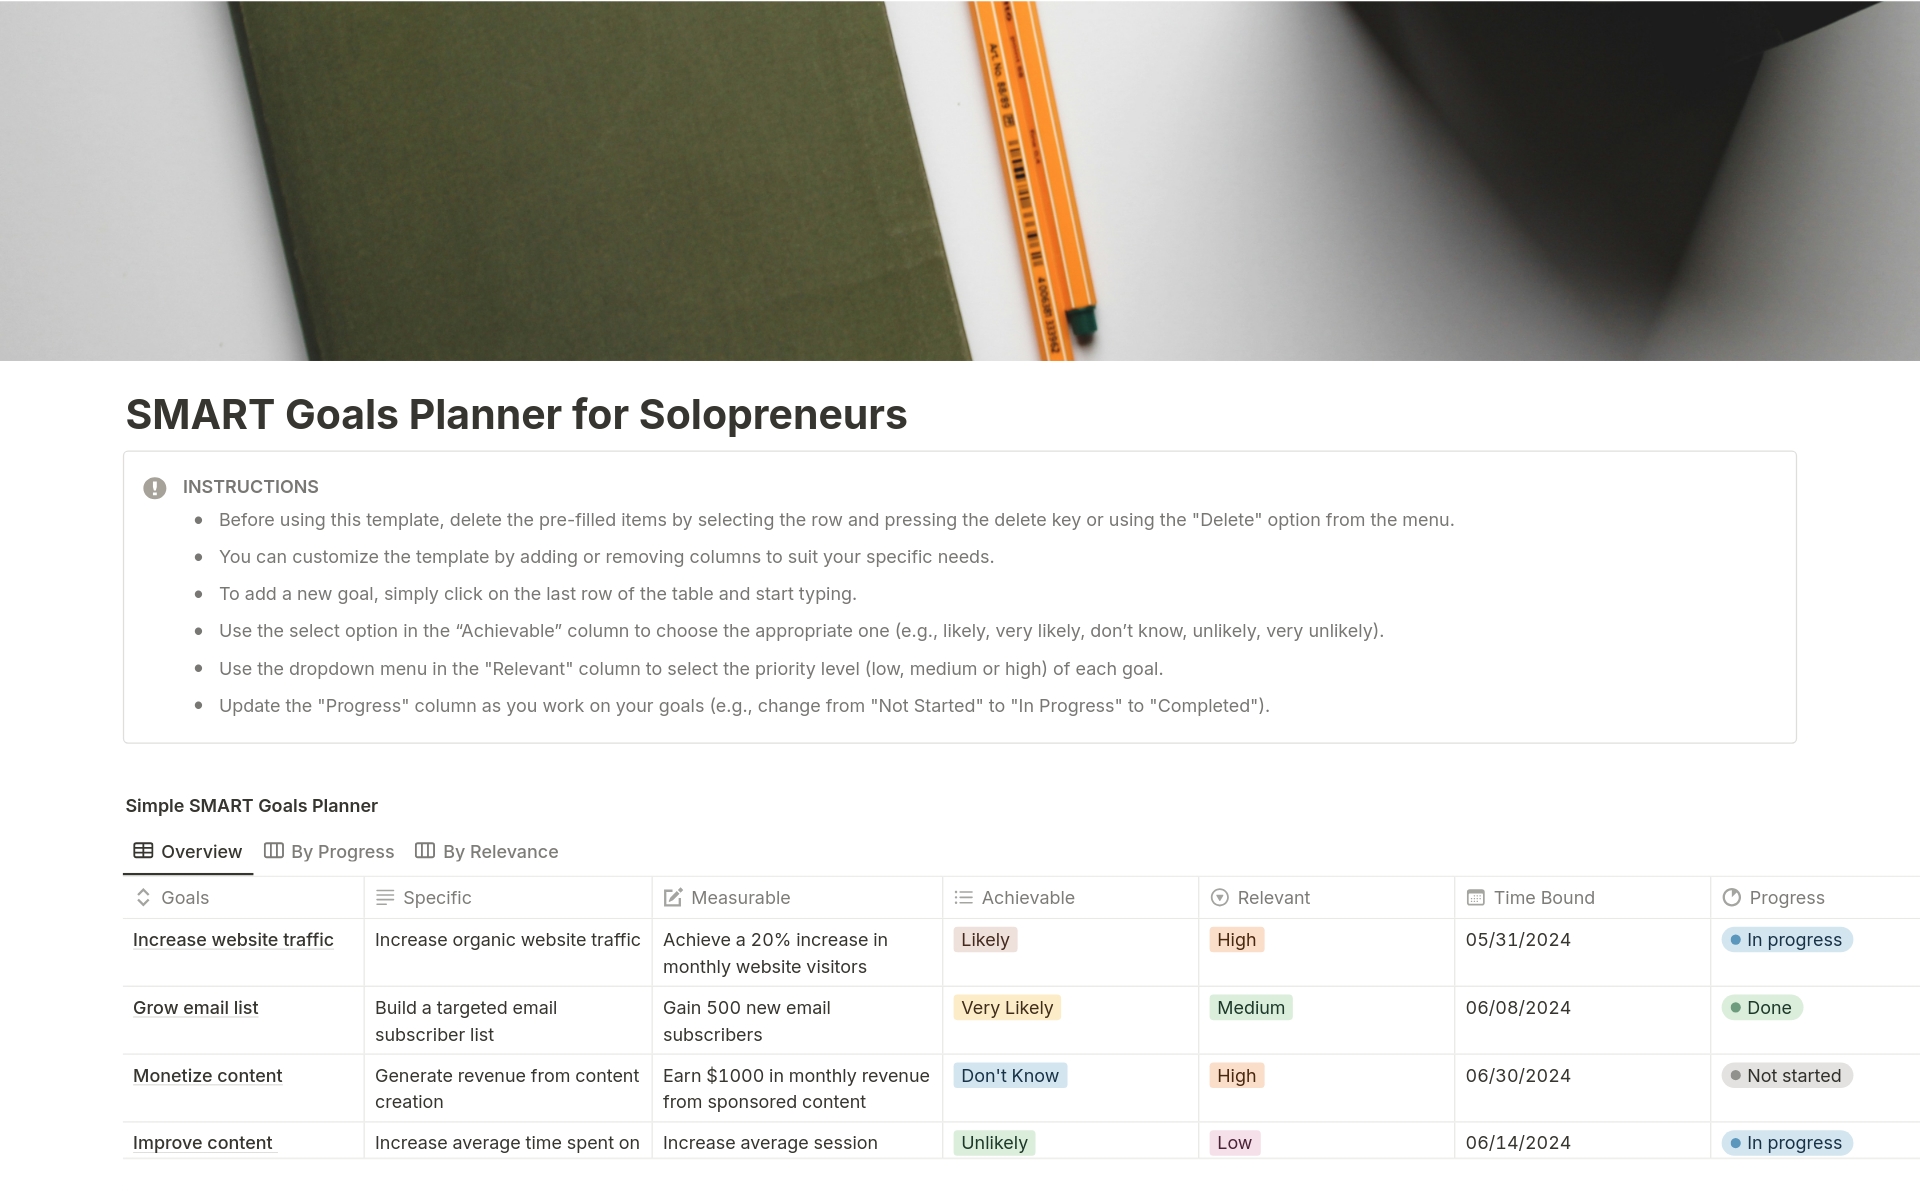 A template preview for SMART Goals Planner for Solopreneurs